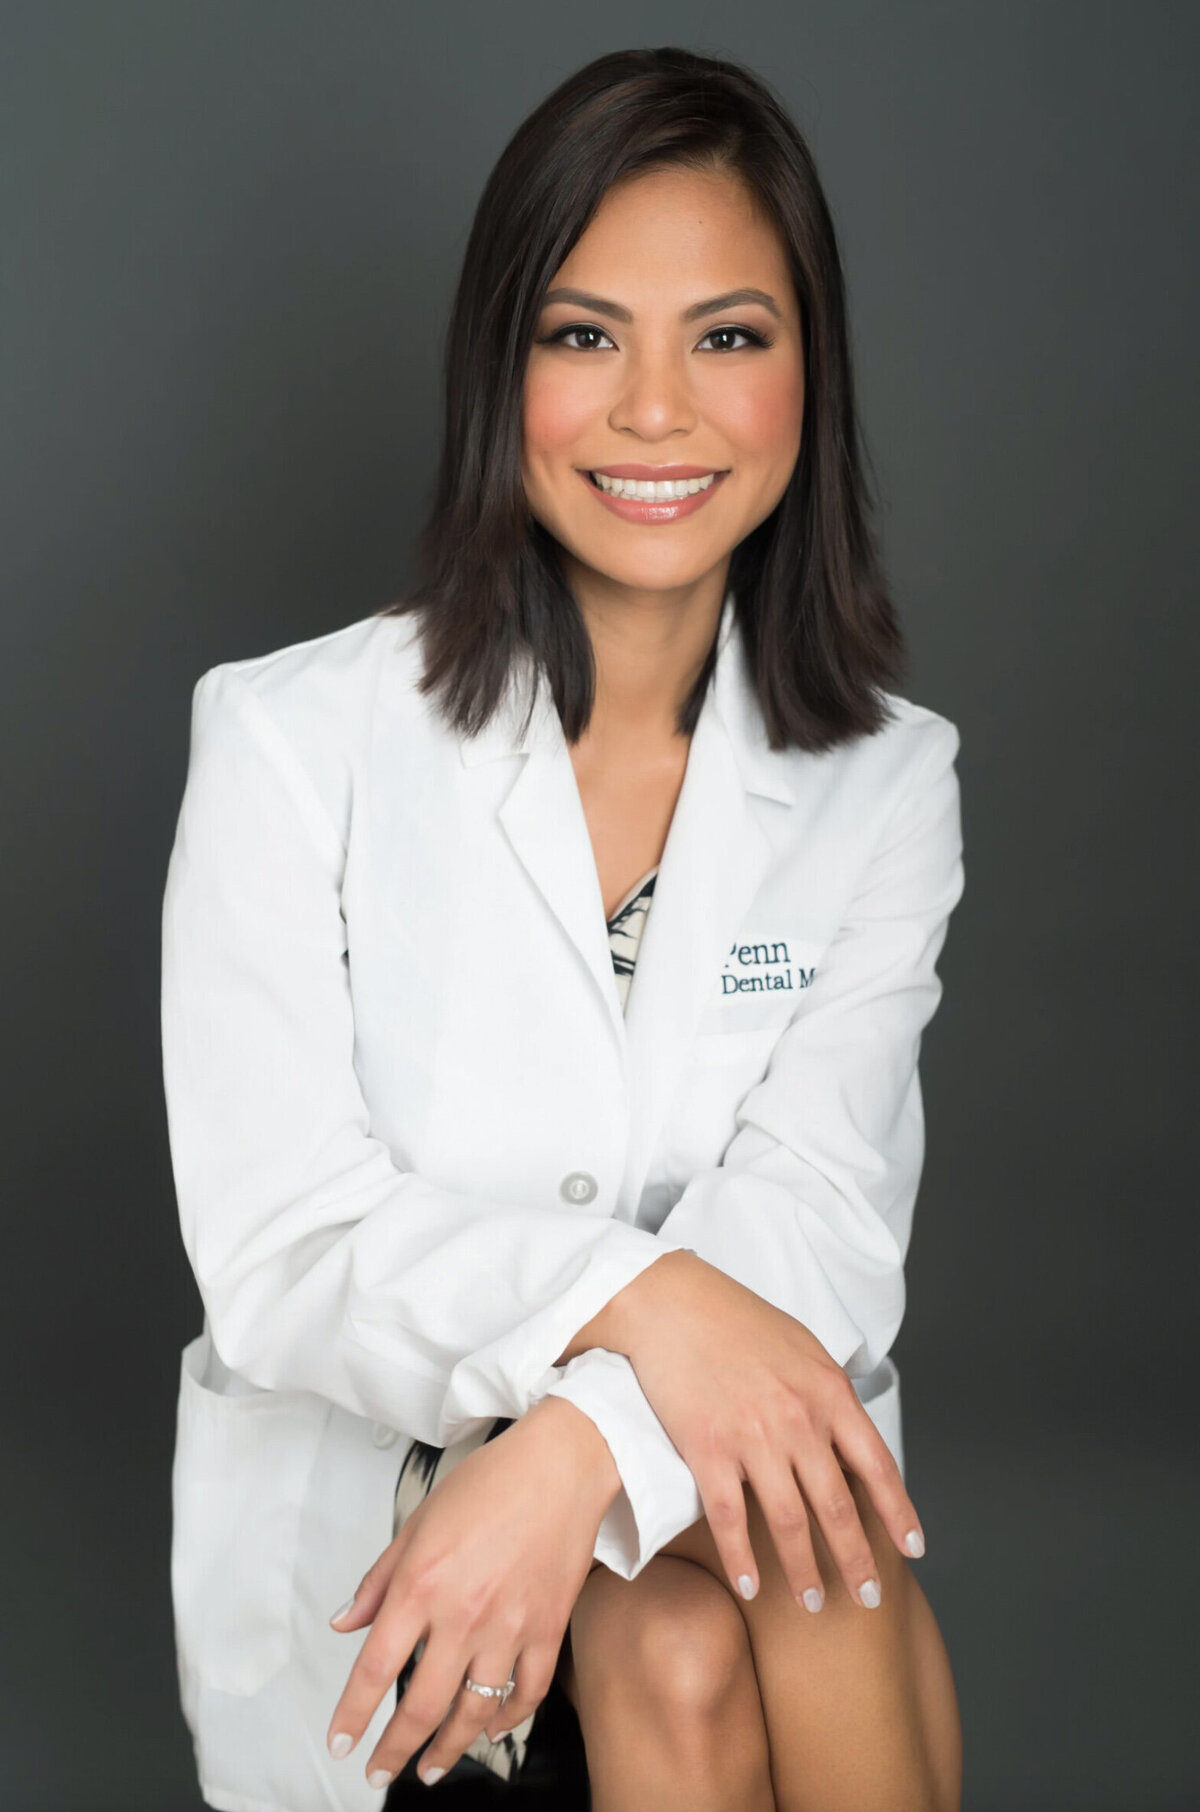 Female dentist posing for a professional headshot on a gray background in a New Jersey studio